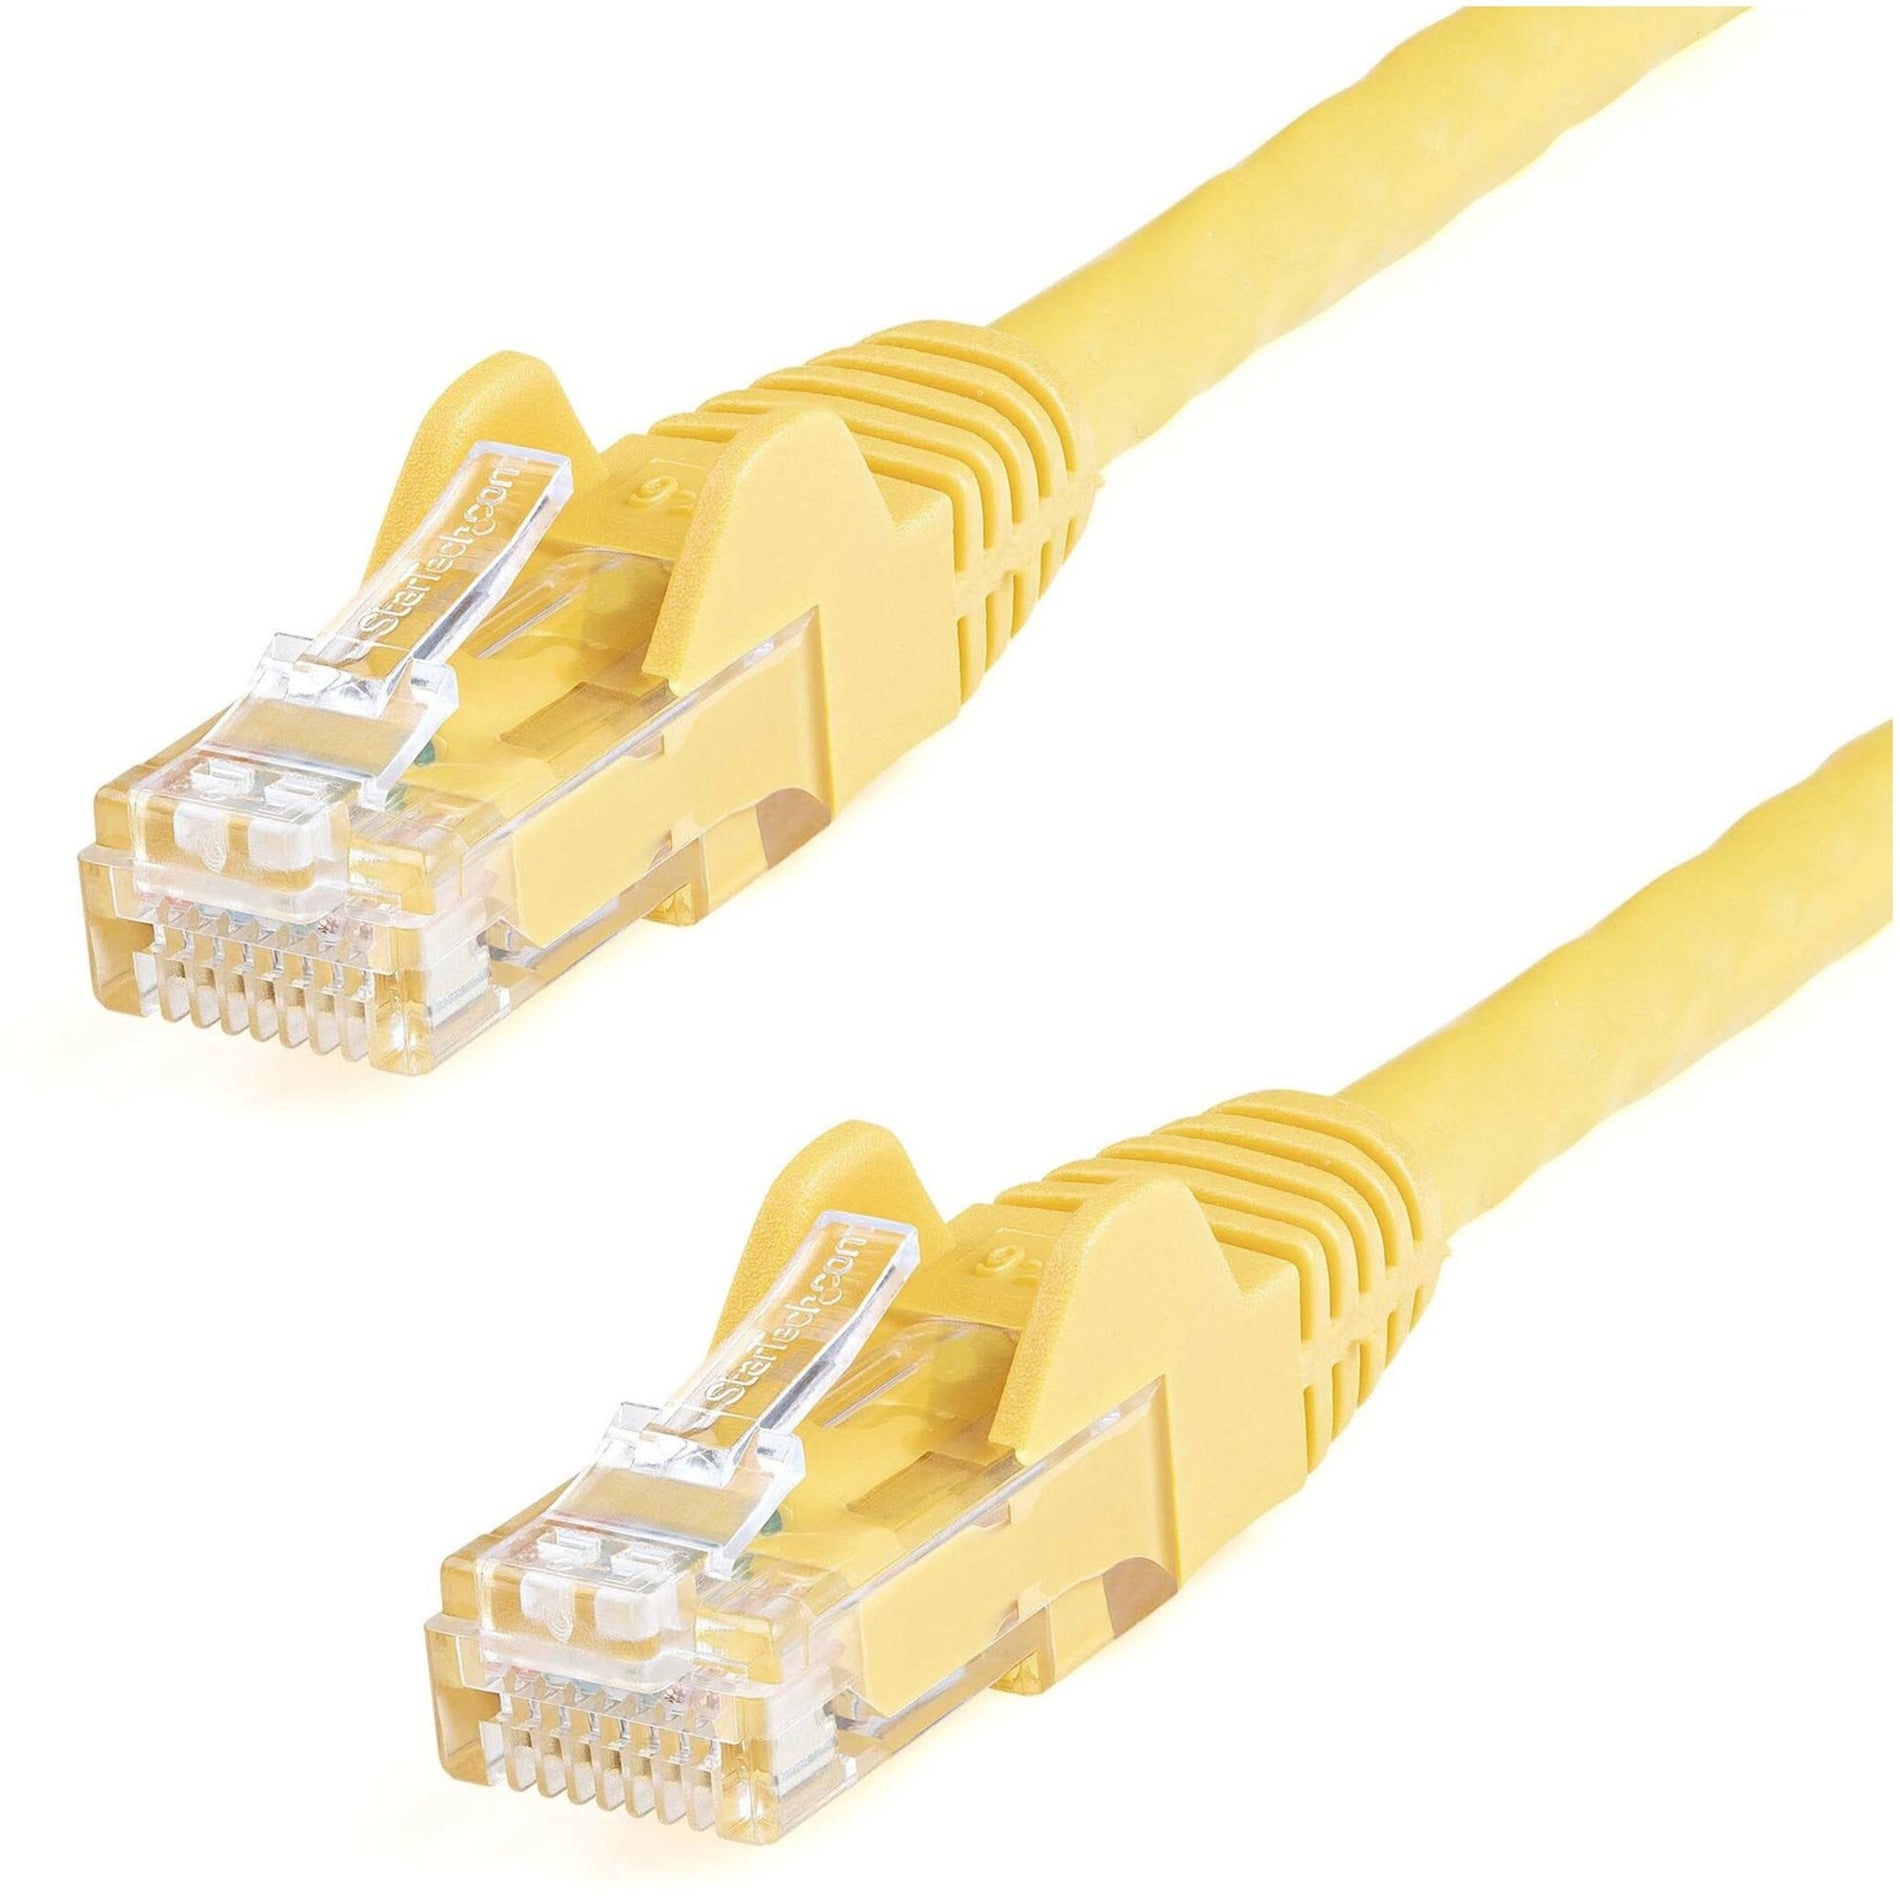 StarTech.com N6PATCH100YL 100 ft Yellow Snagless Cat6 UTP Patch Cable, PoE, 10 Gbit/s Data Transfer Rate